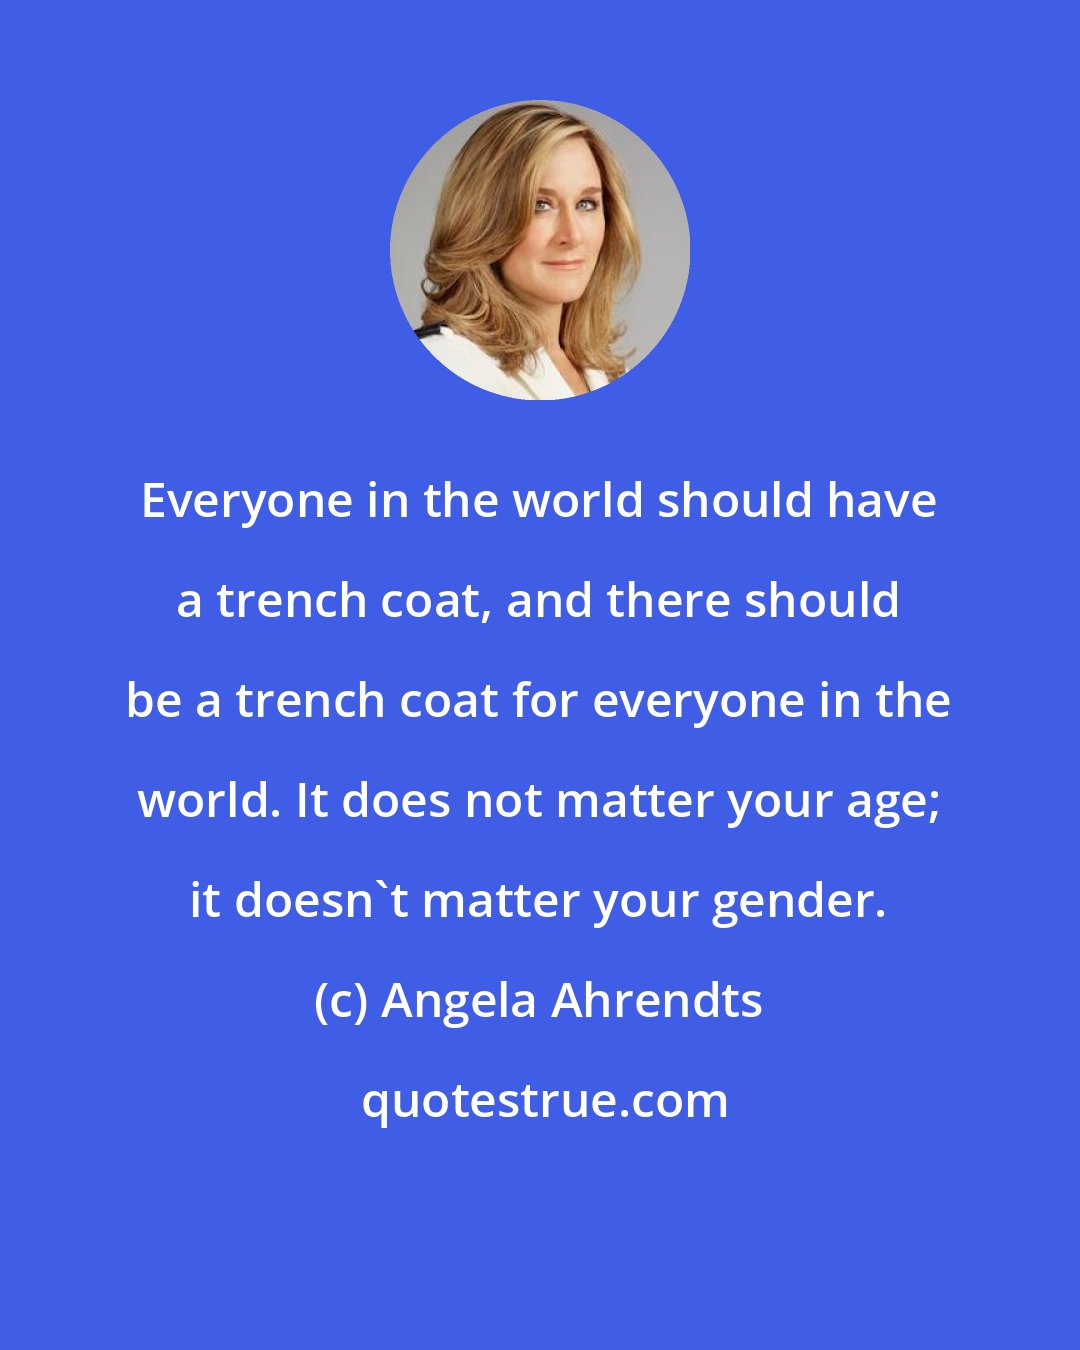 Angela Ahrendts: Everyone in the world should have a trench coat, and there should be a trench coat for everyone in the world. It does not matter your age; it doesn't matter your gender.